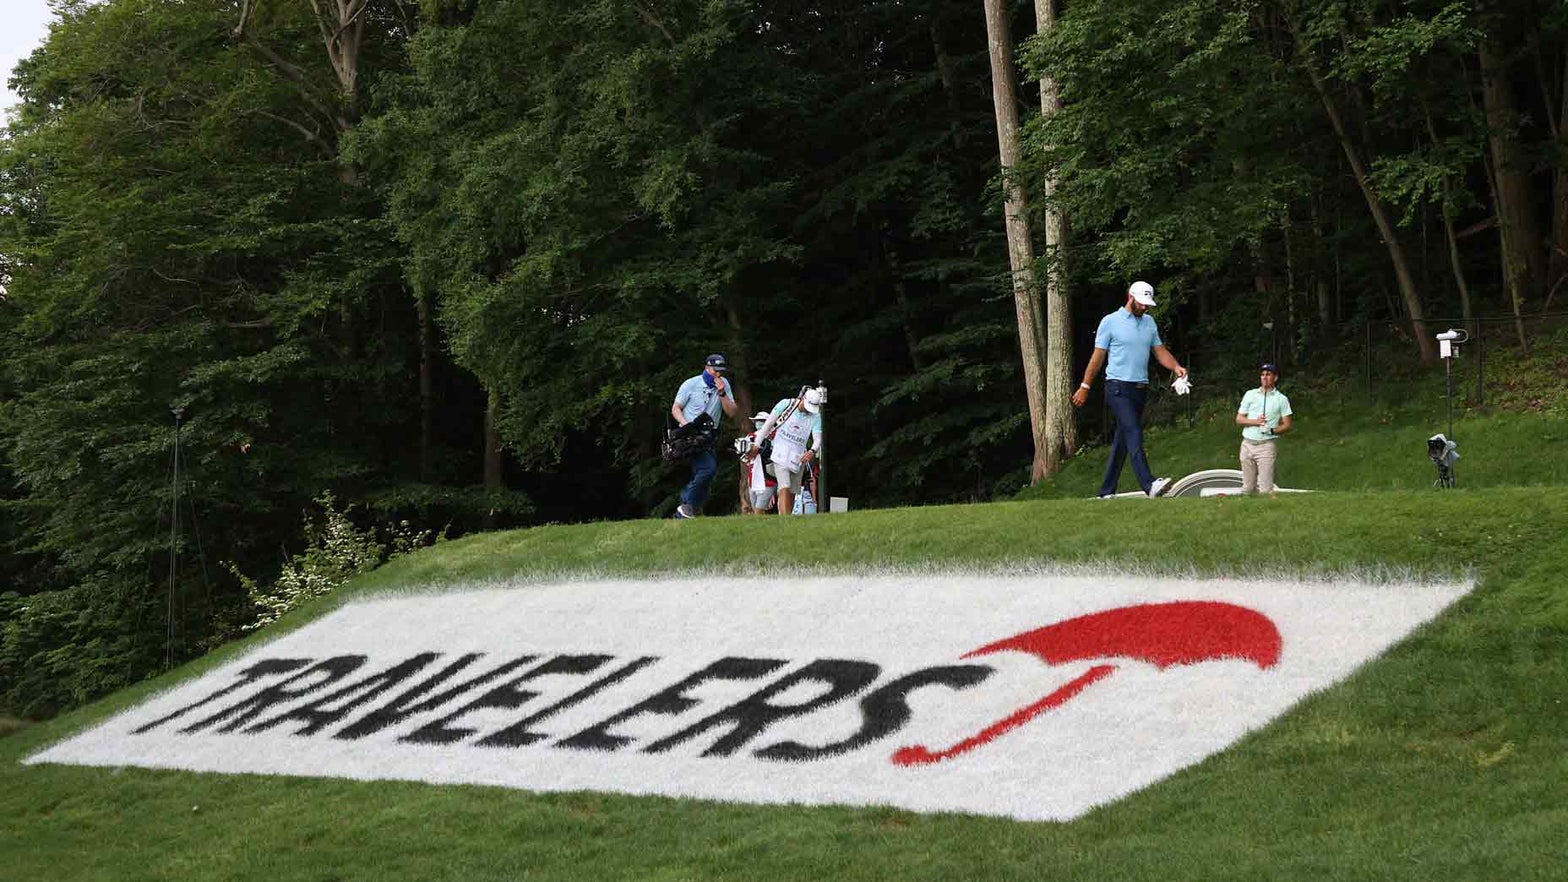 2021 Travelers Championship tee times Round 1 groupings for Thursday